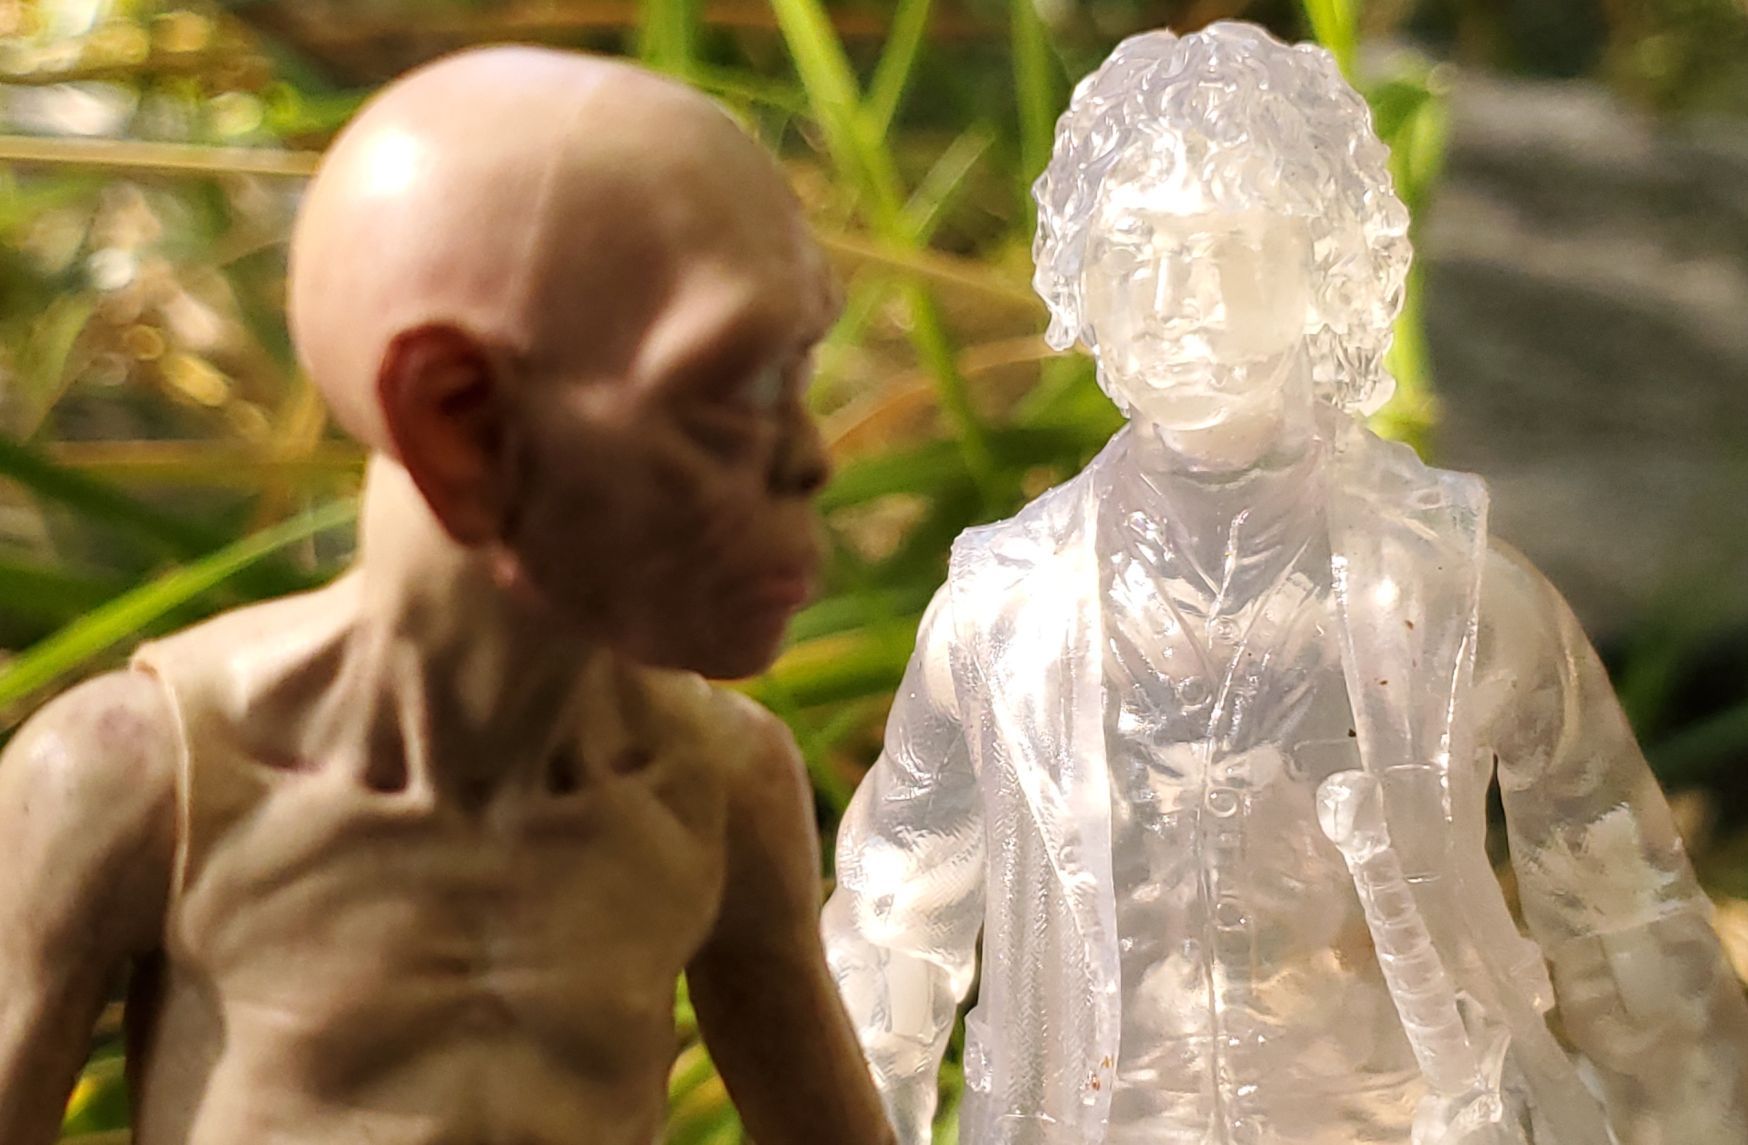  Diamond Select Toys The Lord of The Rings: Gollum